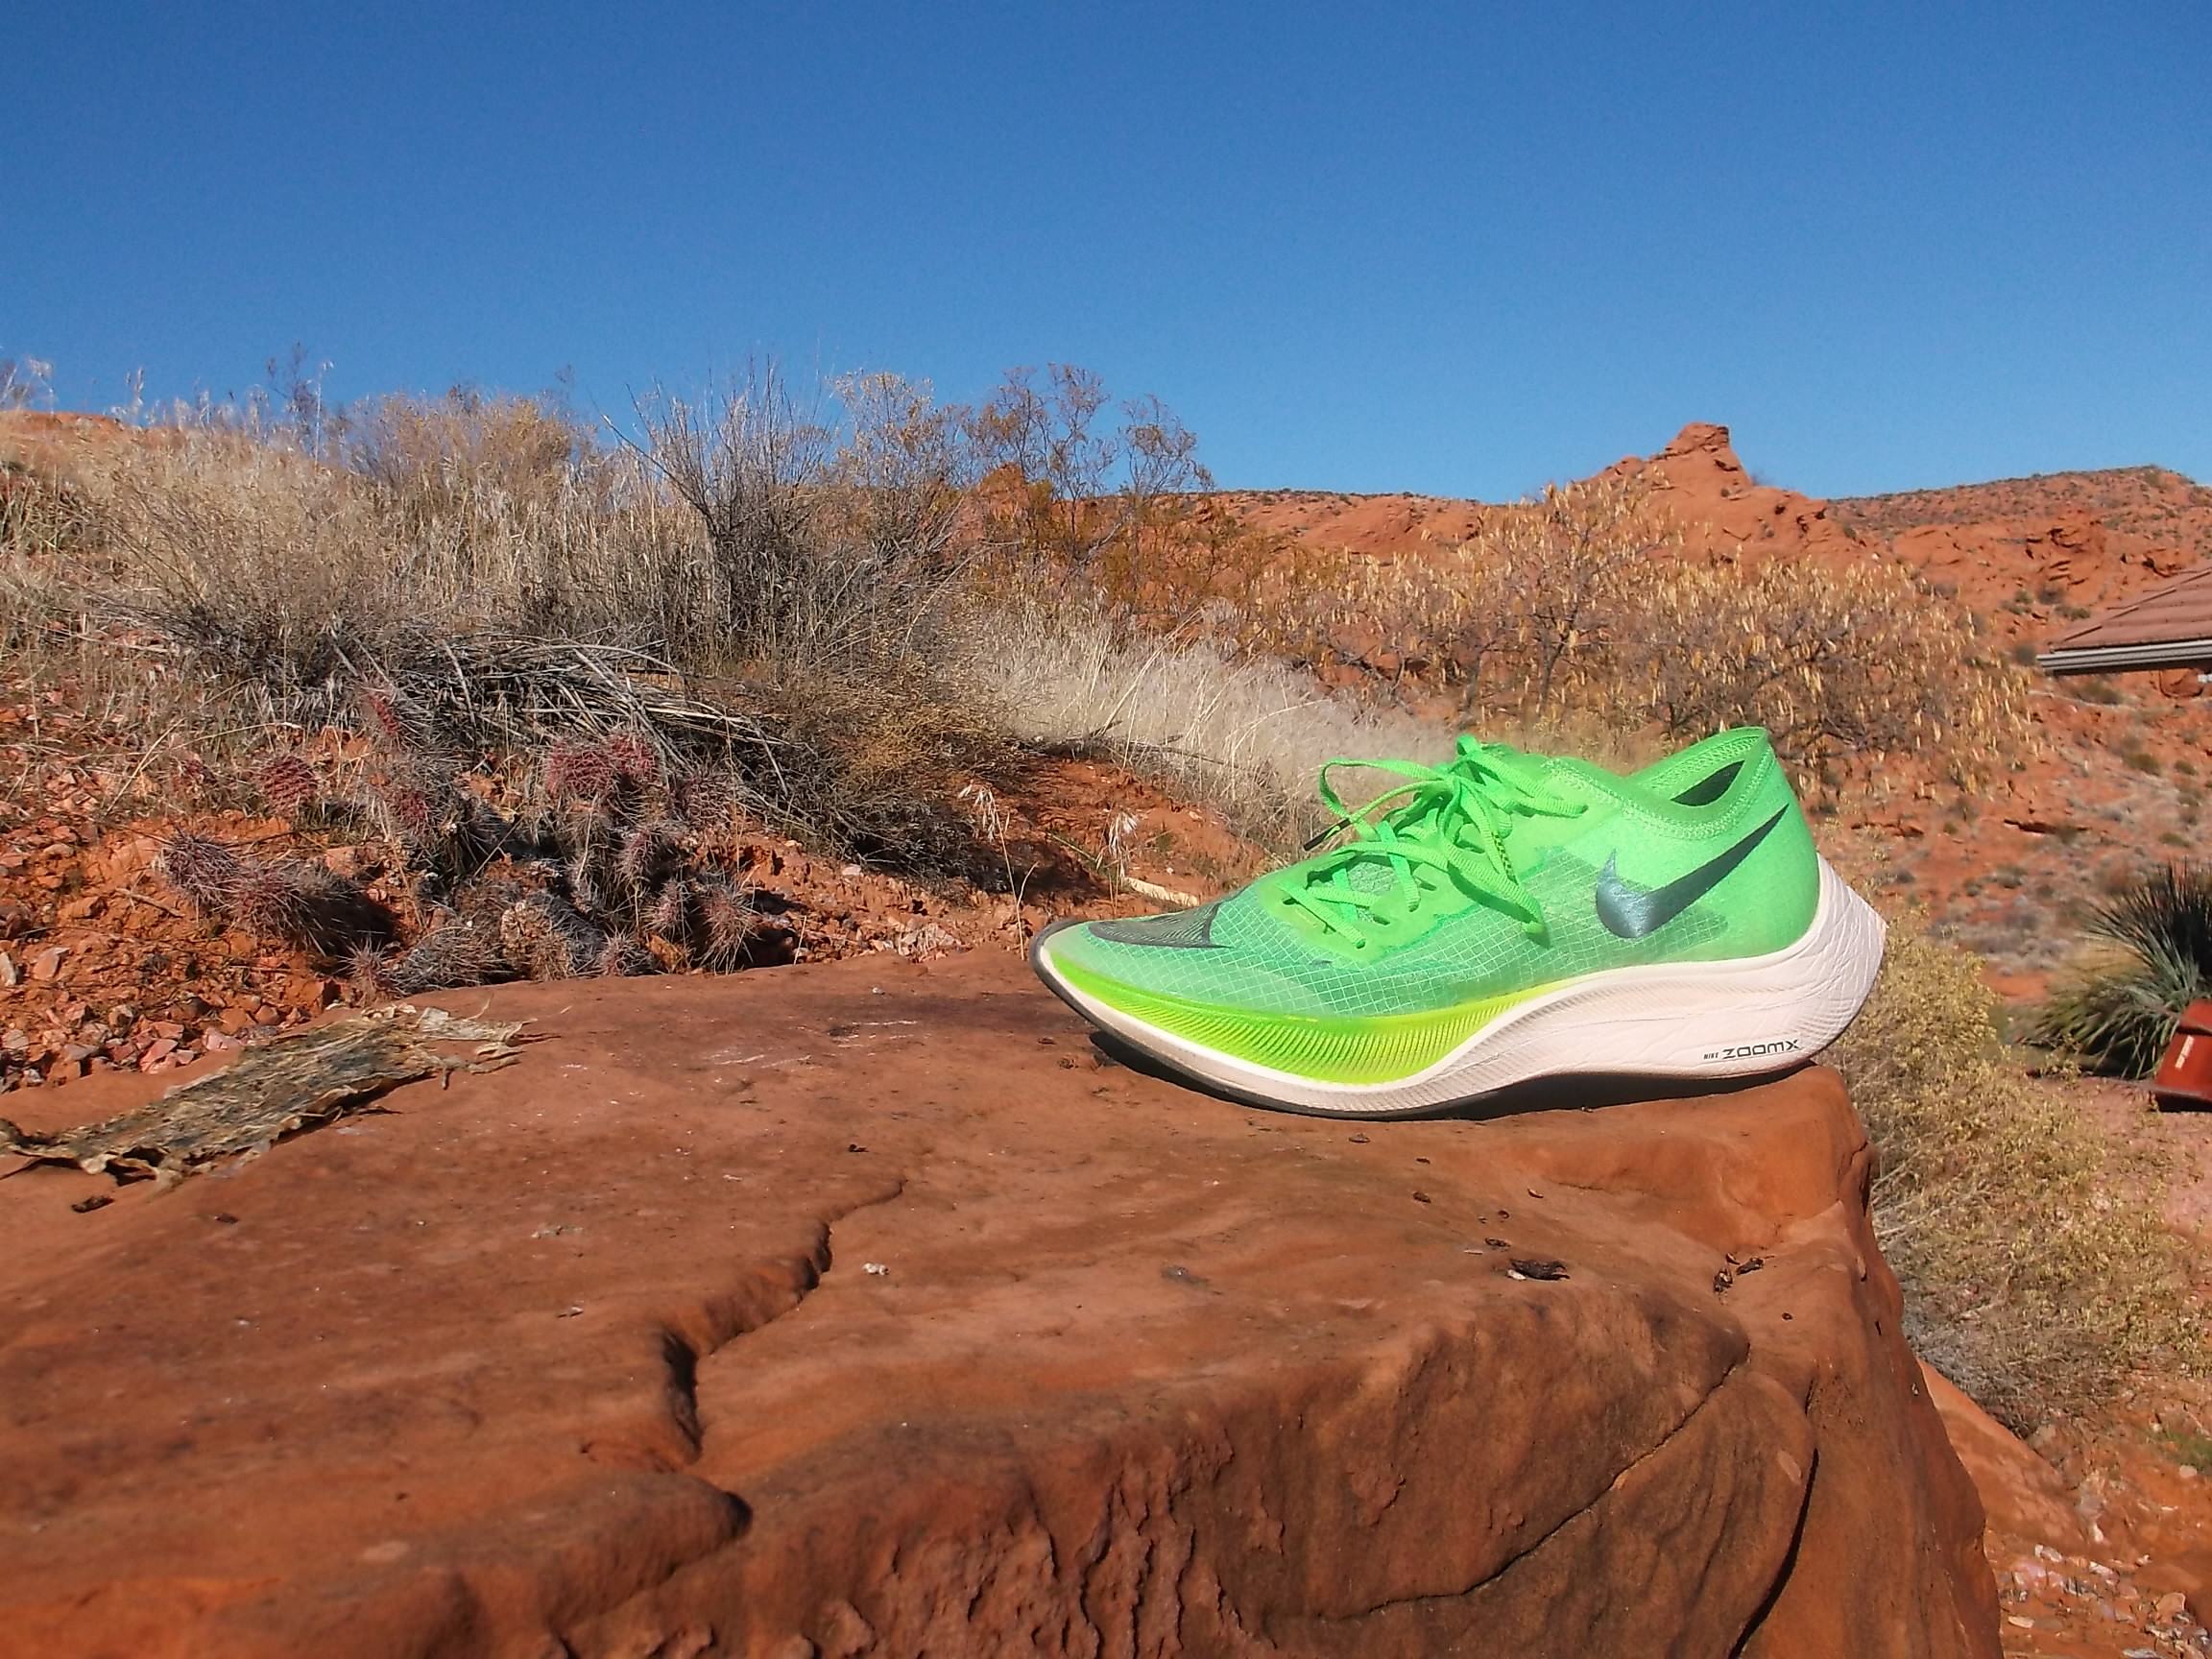 Trail Version of the Nike Vaporfly 